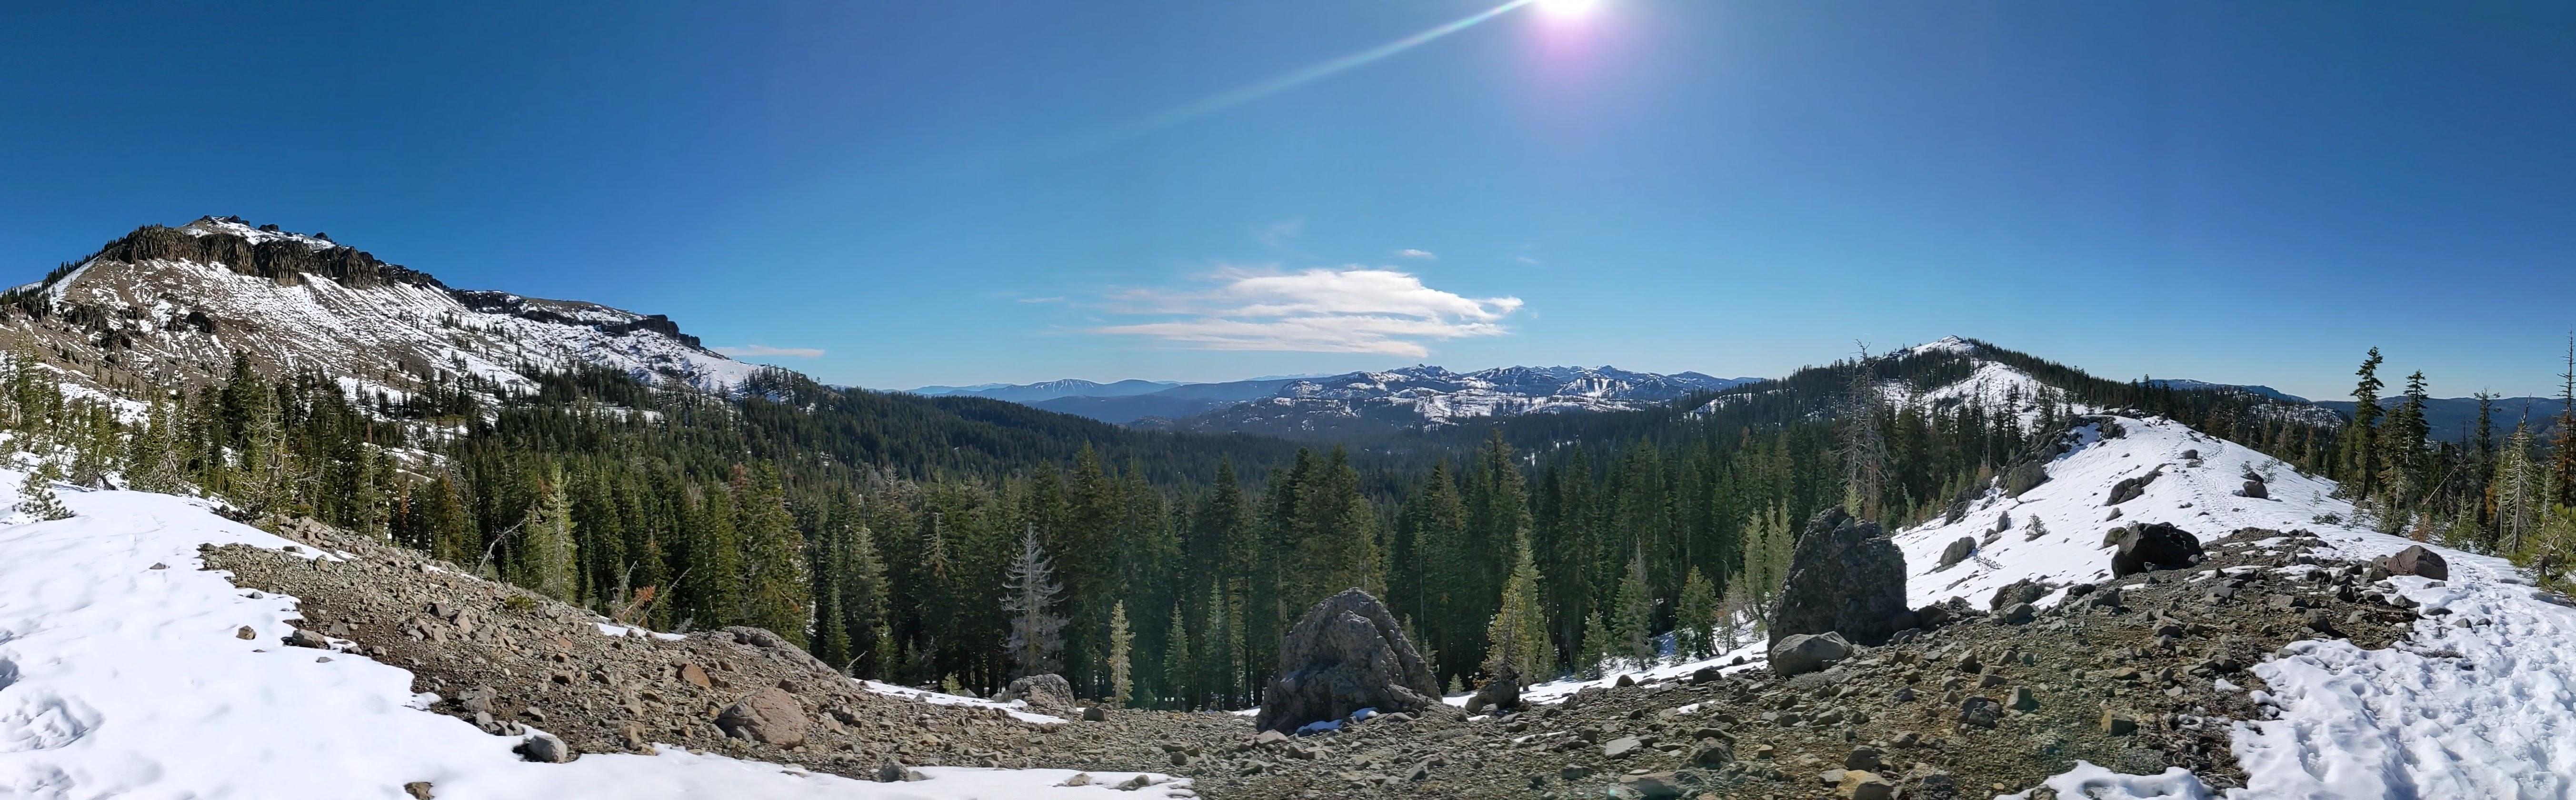 View from the ridge toward Donner Lake, approximately half way up